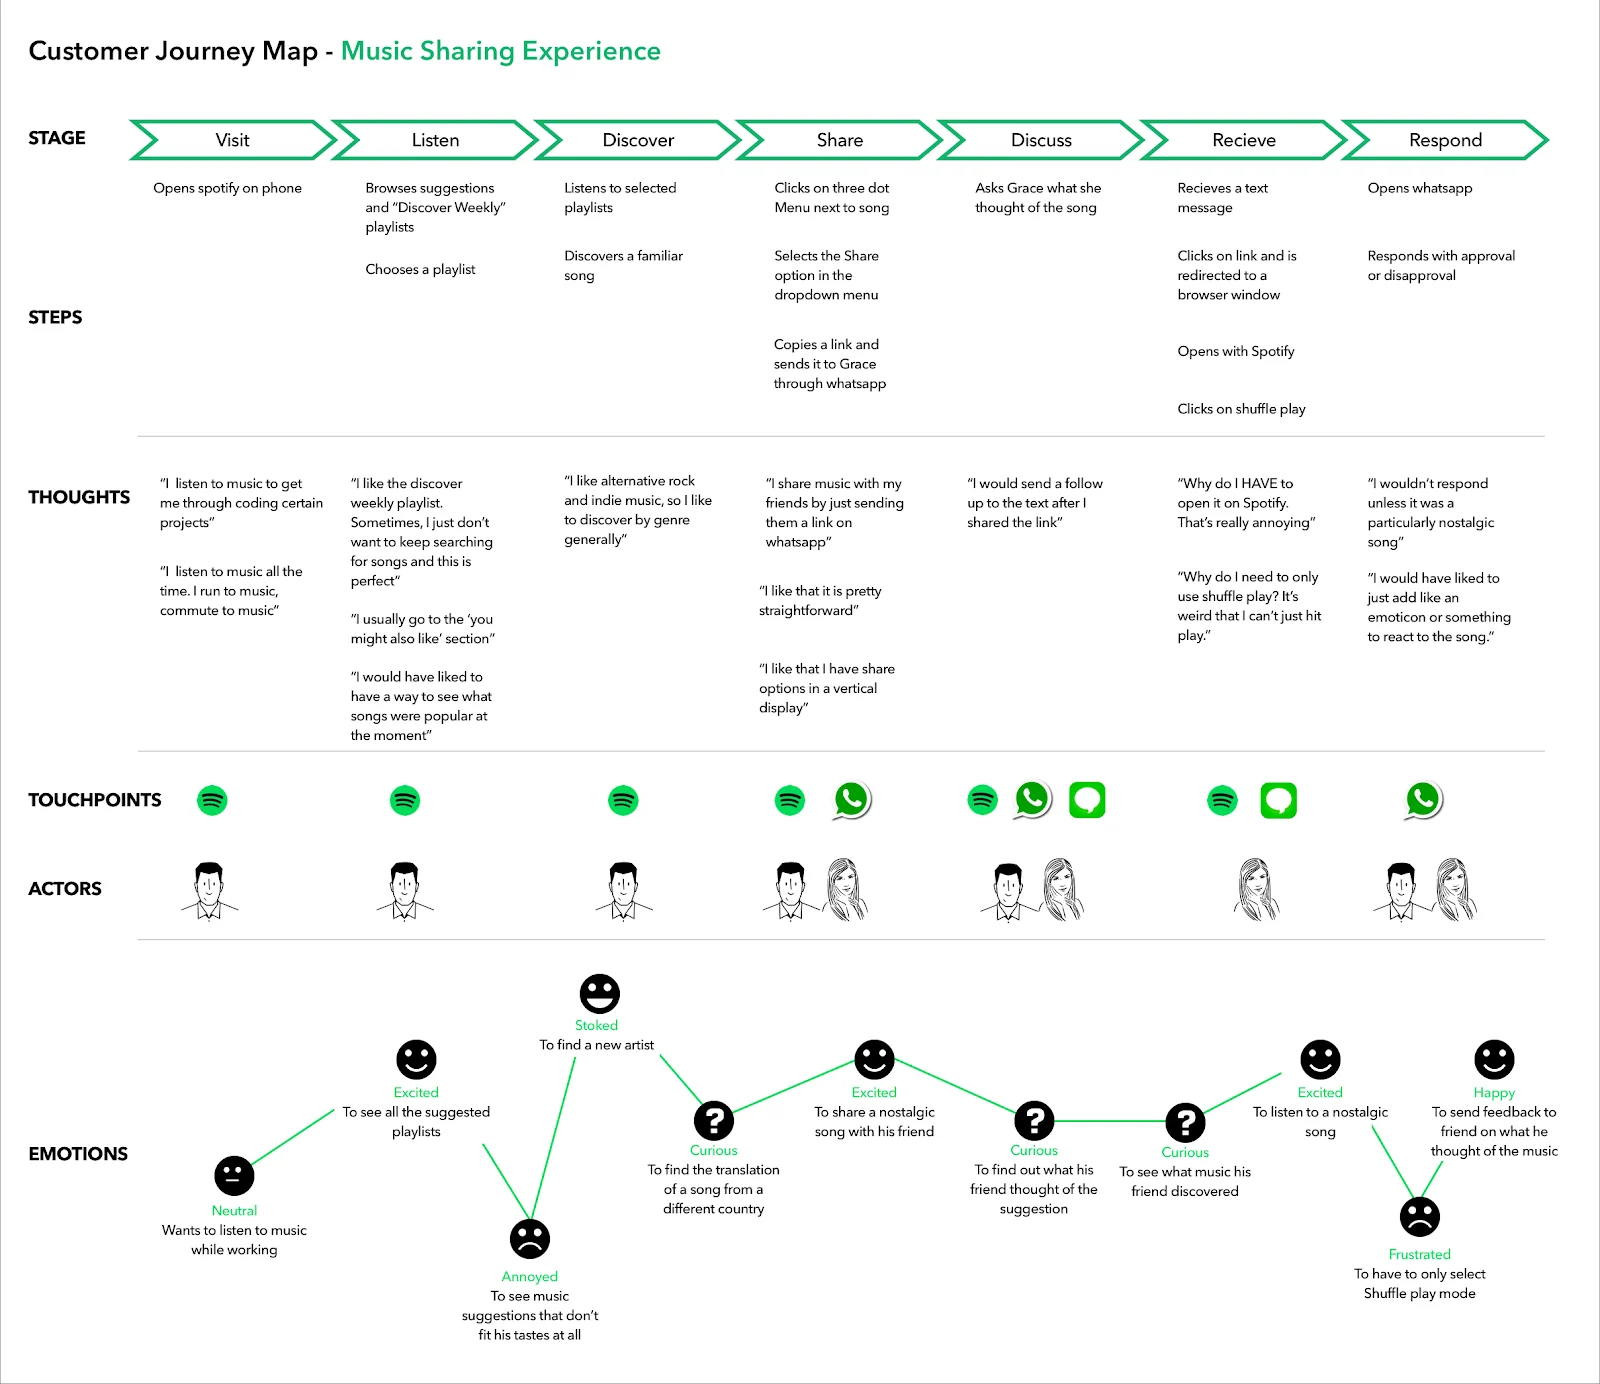 Audiense blog - Spotify Customer journey map “Music Sharing Experience”